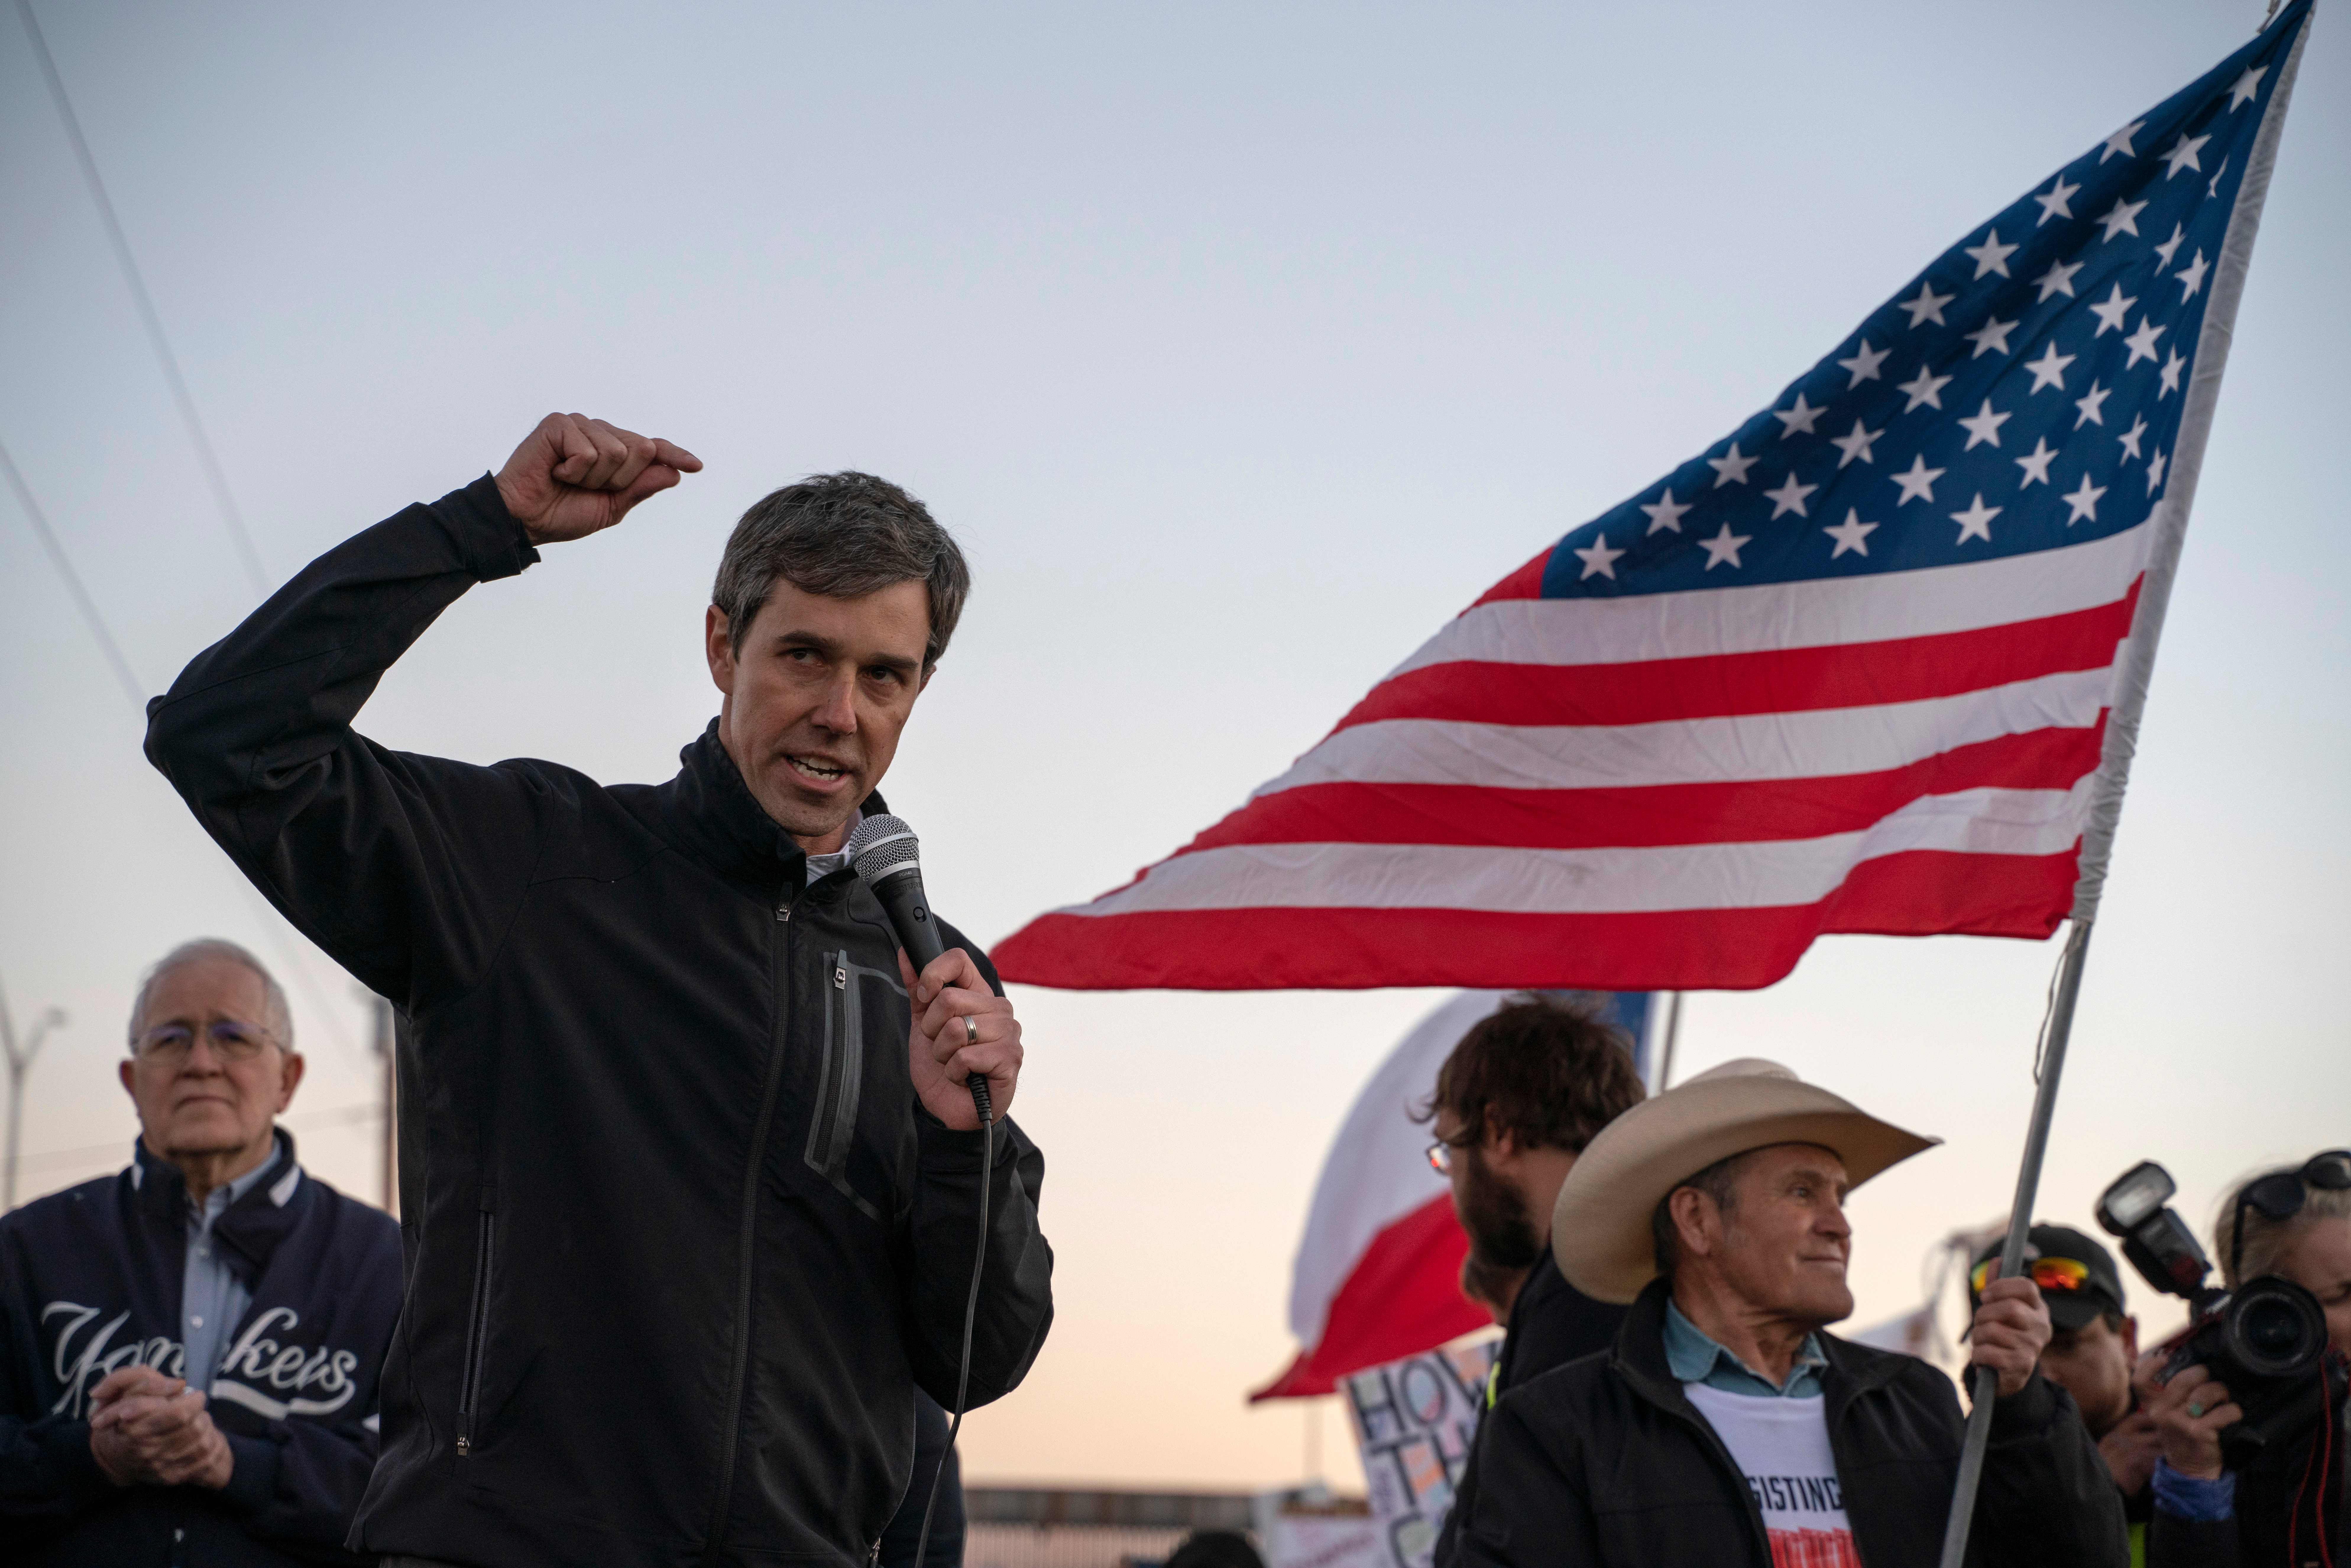 Former Texas Congressman Beto O'Rourke speaks to a crowd of marchers during the anti-Trump "March for Truth" in El Paso, Texas, on February 11, 2019. (PAUL RATJE/AFP/Getty Images)